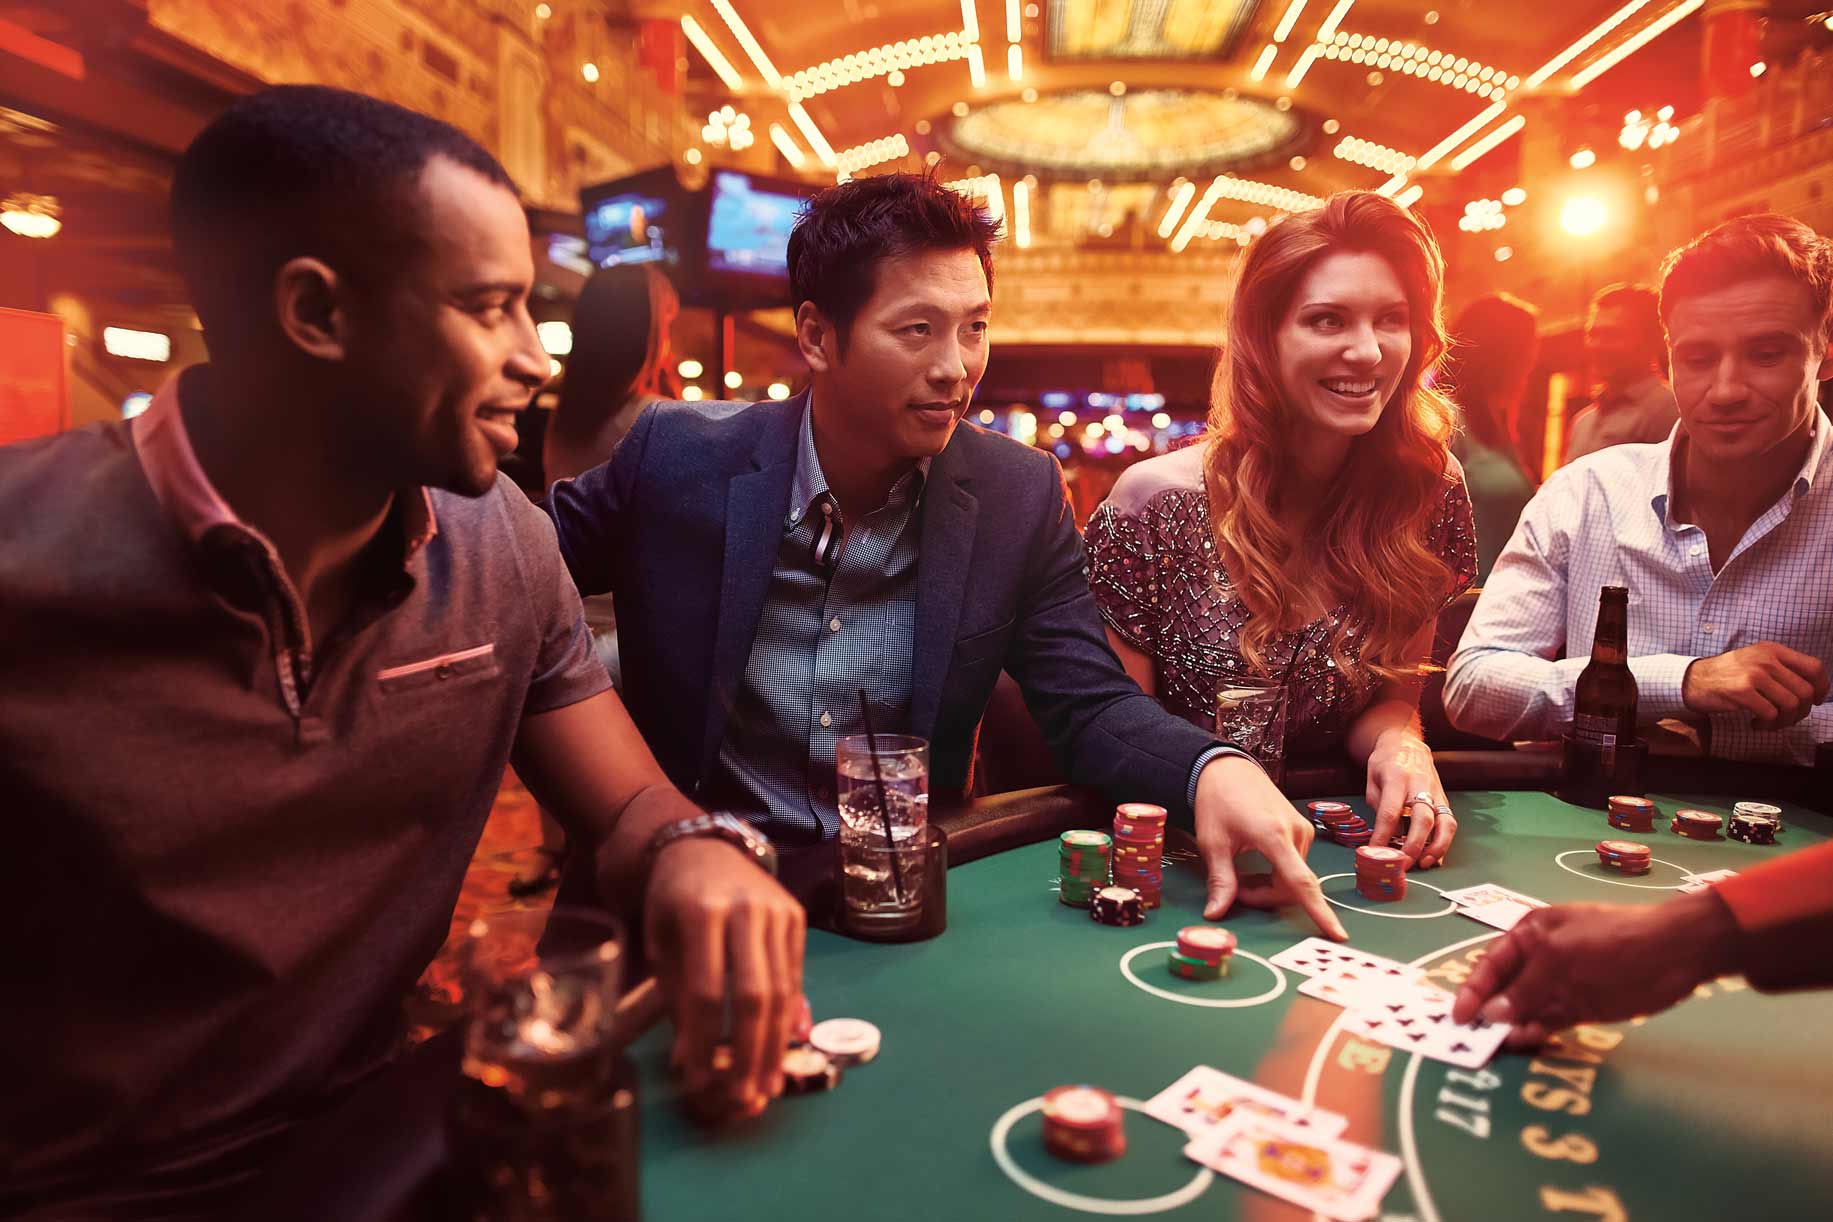 What are the benefits of playing online gambling?